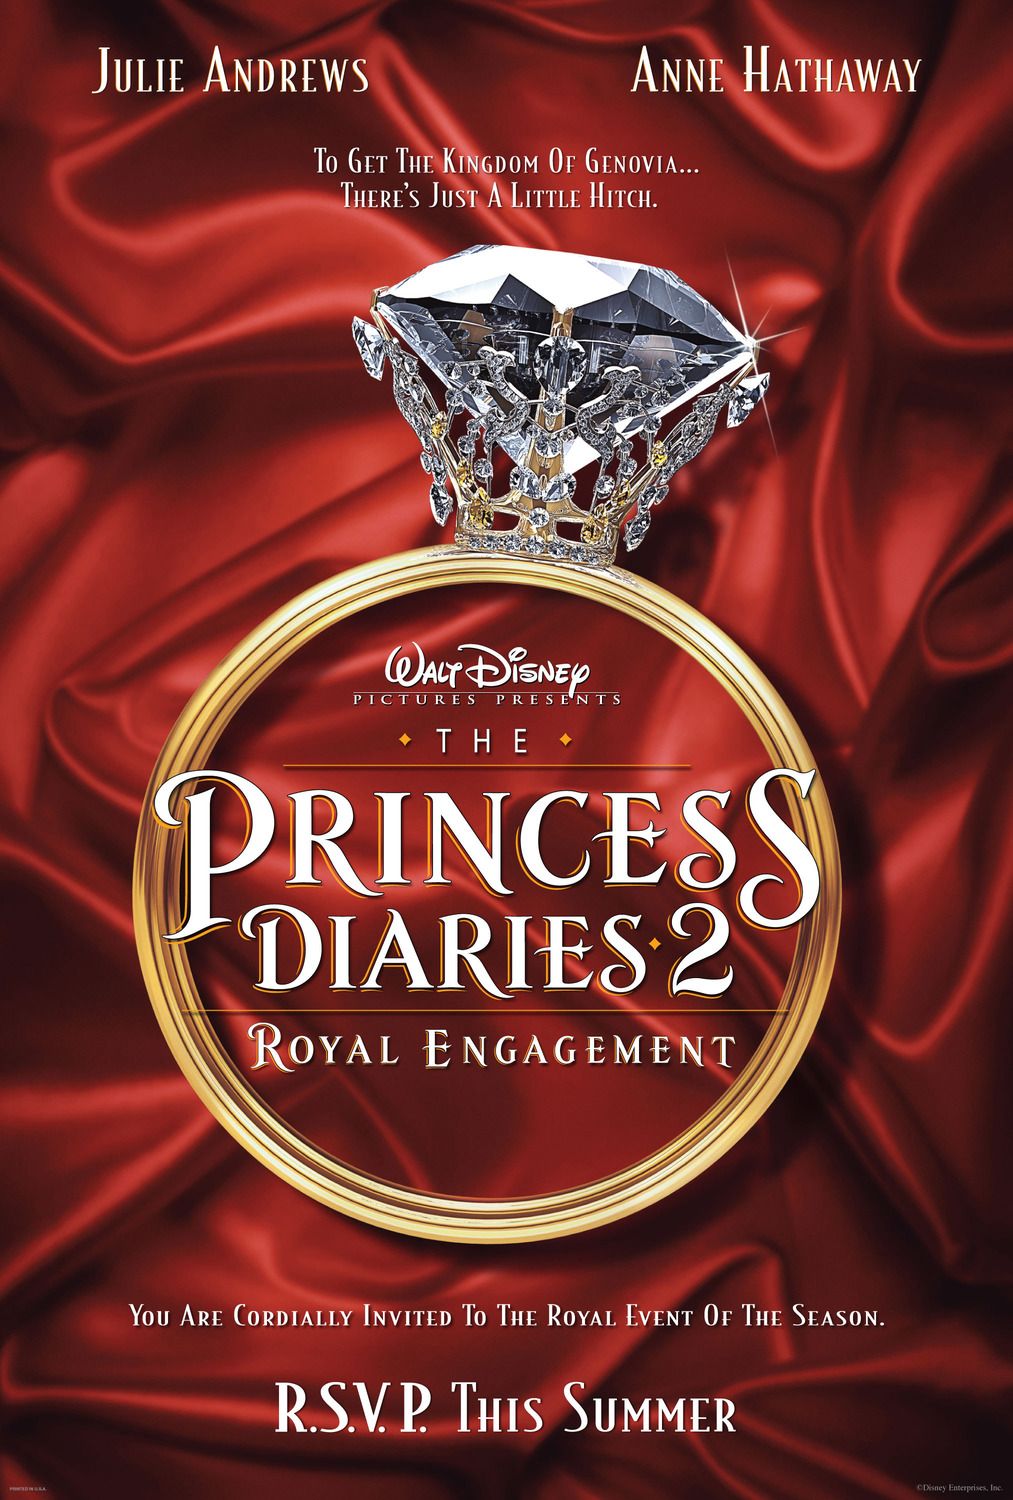 The Princess Diaries 2: Royal Engagement Movie Poster ( of 4)